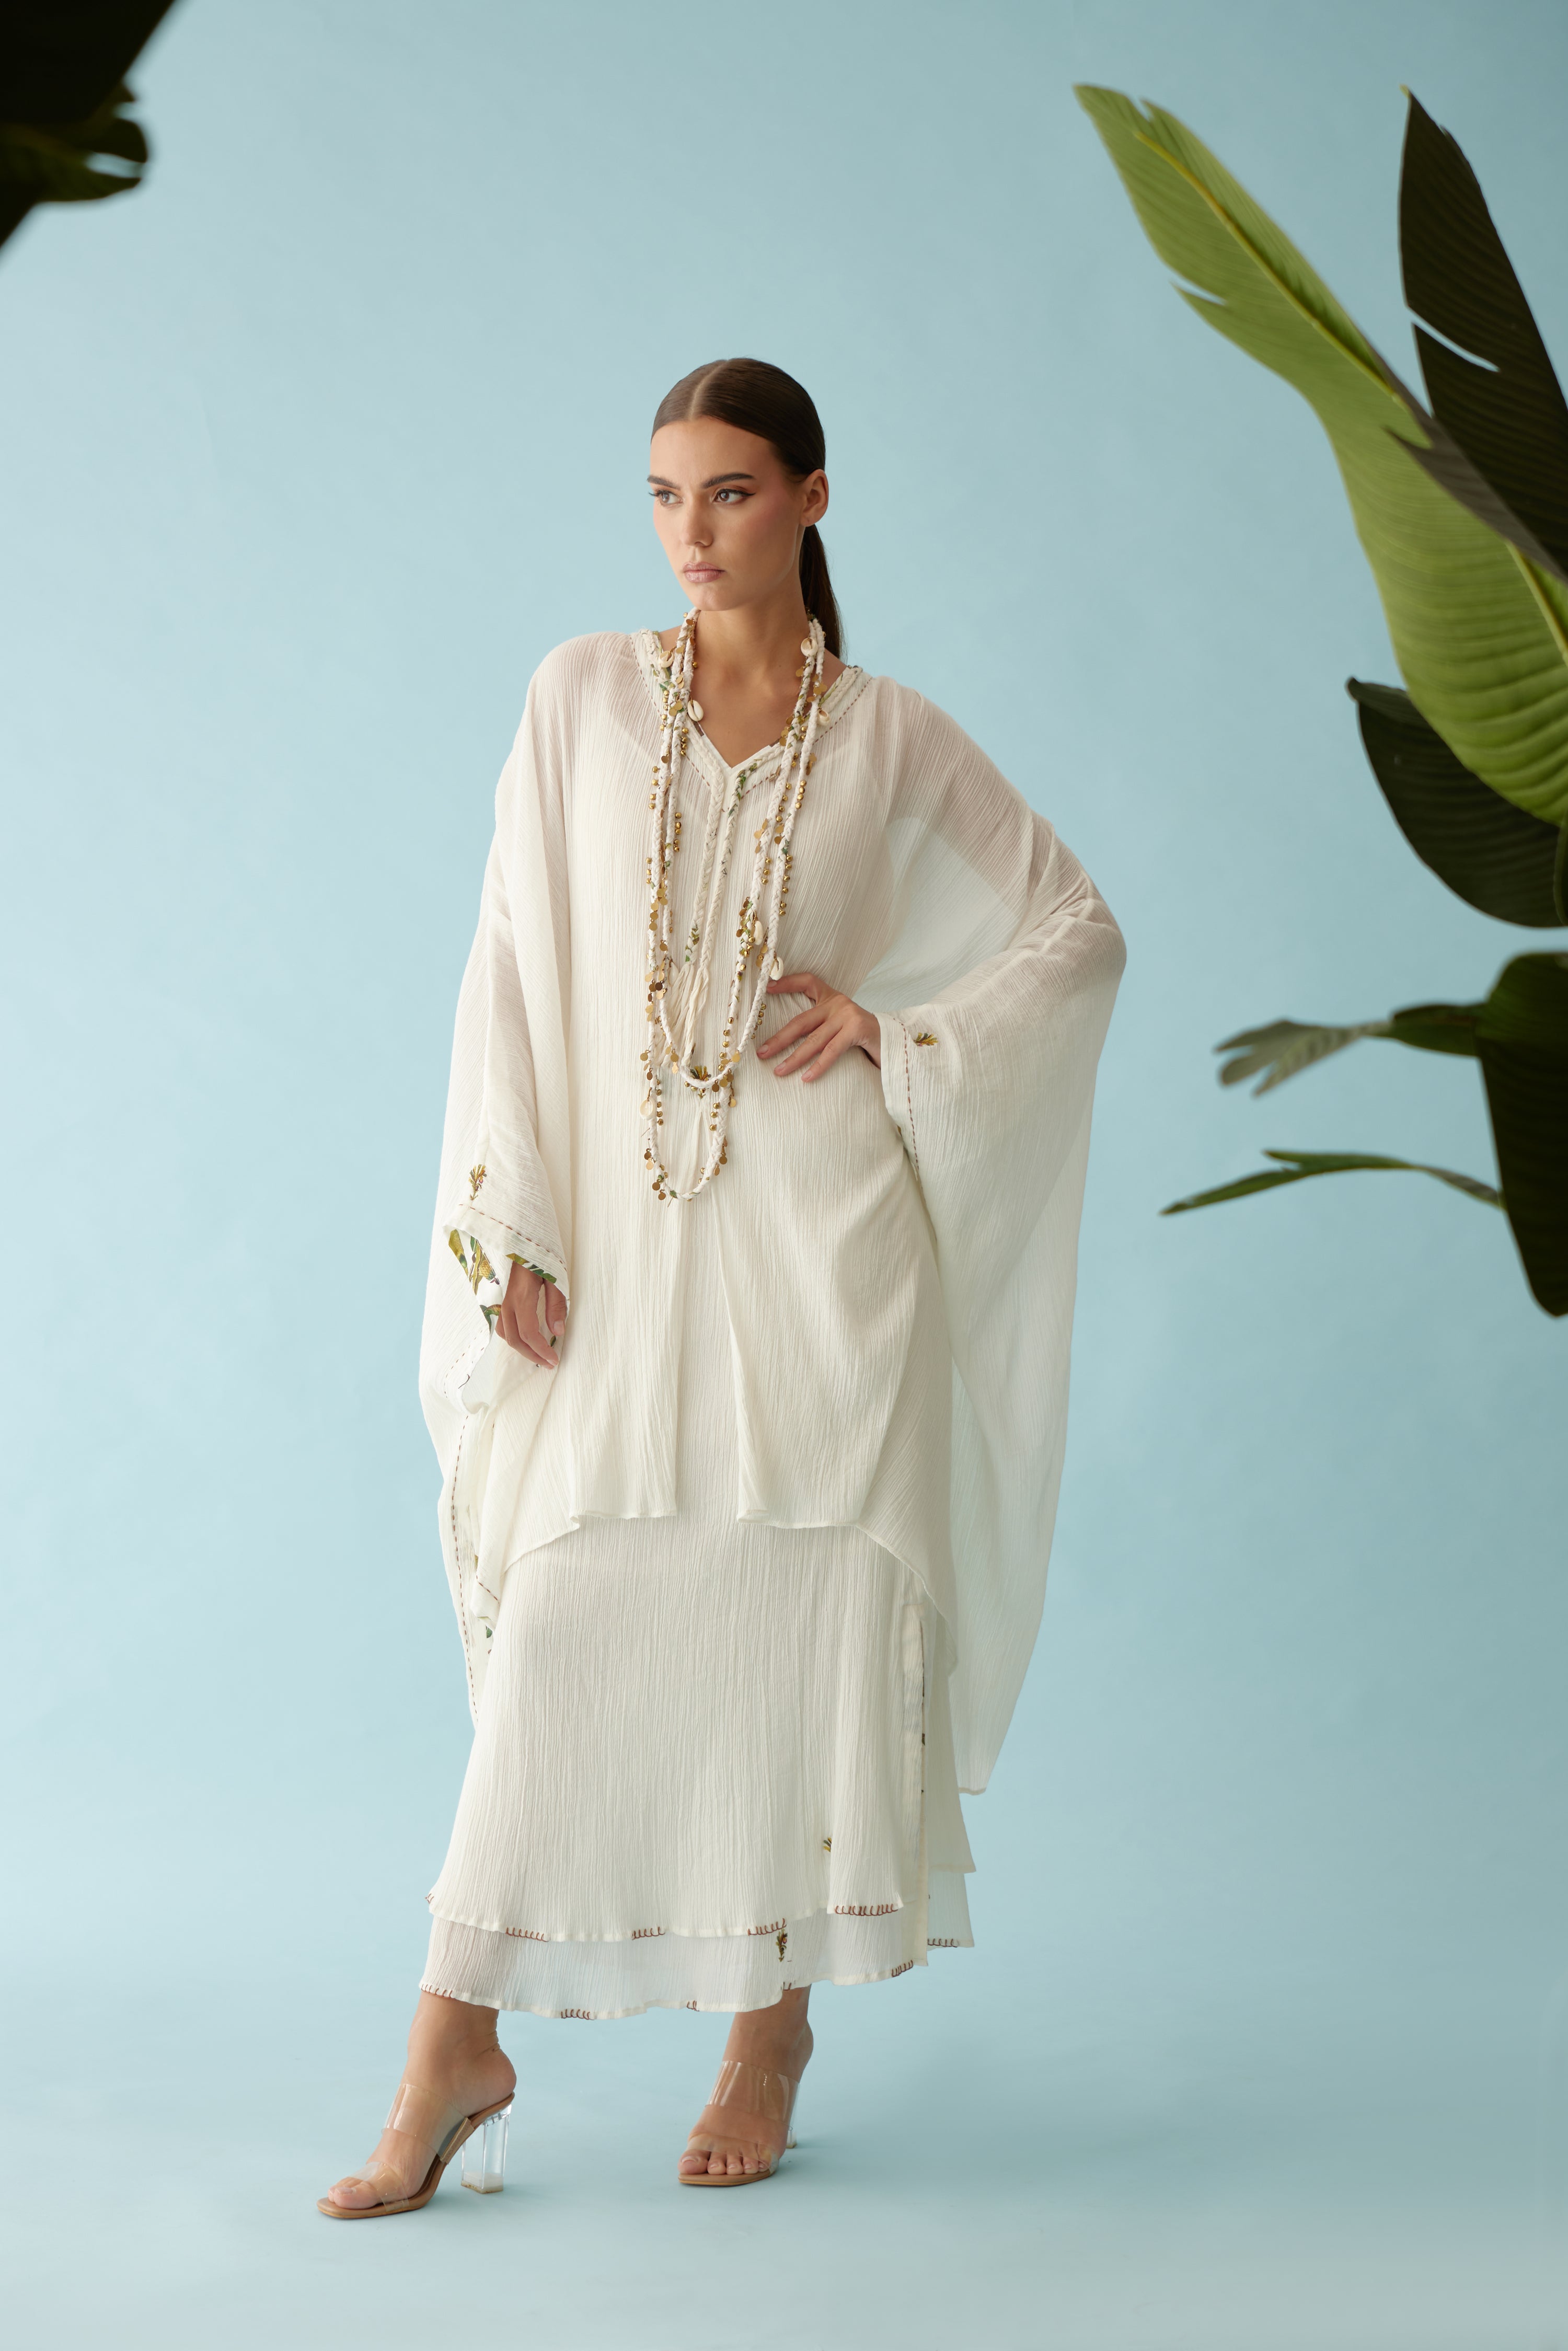 Off-White Hand Braided tassels And Banana Tree Applique Co-Ord Sets